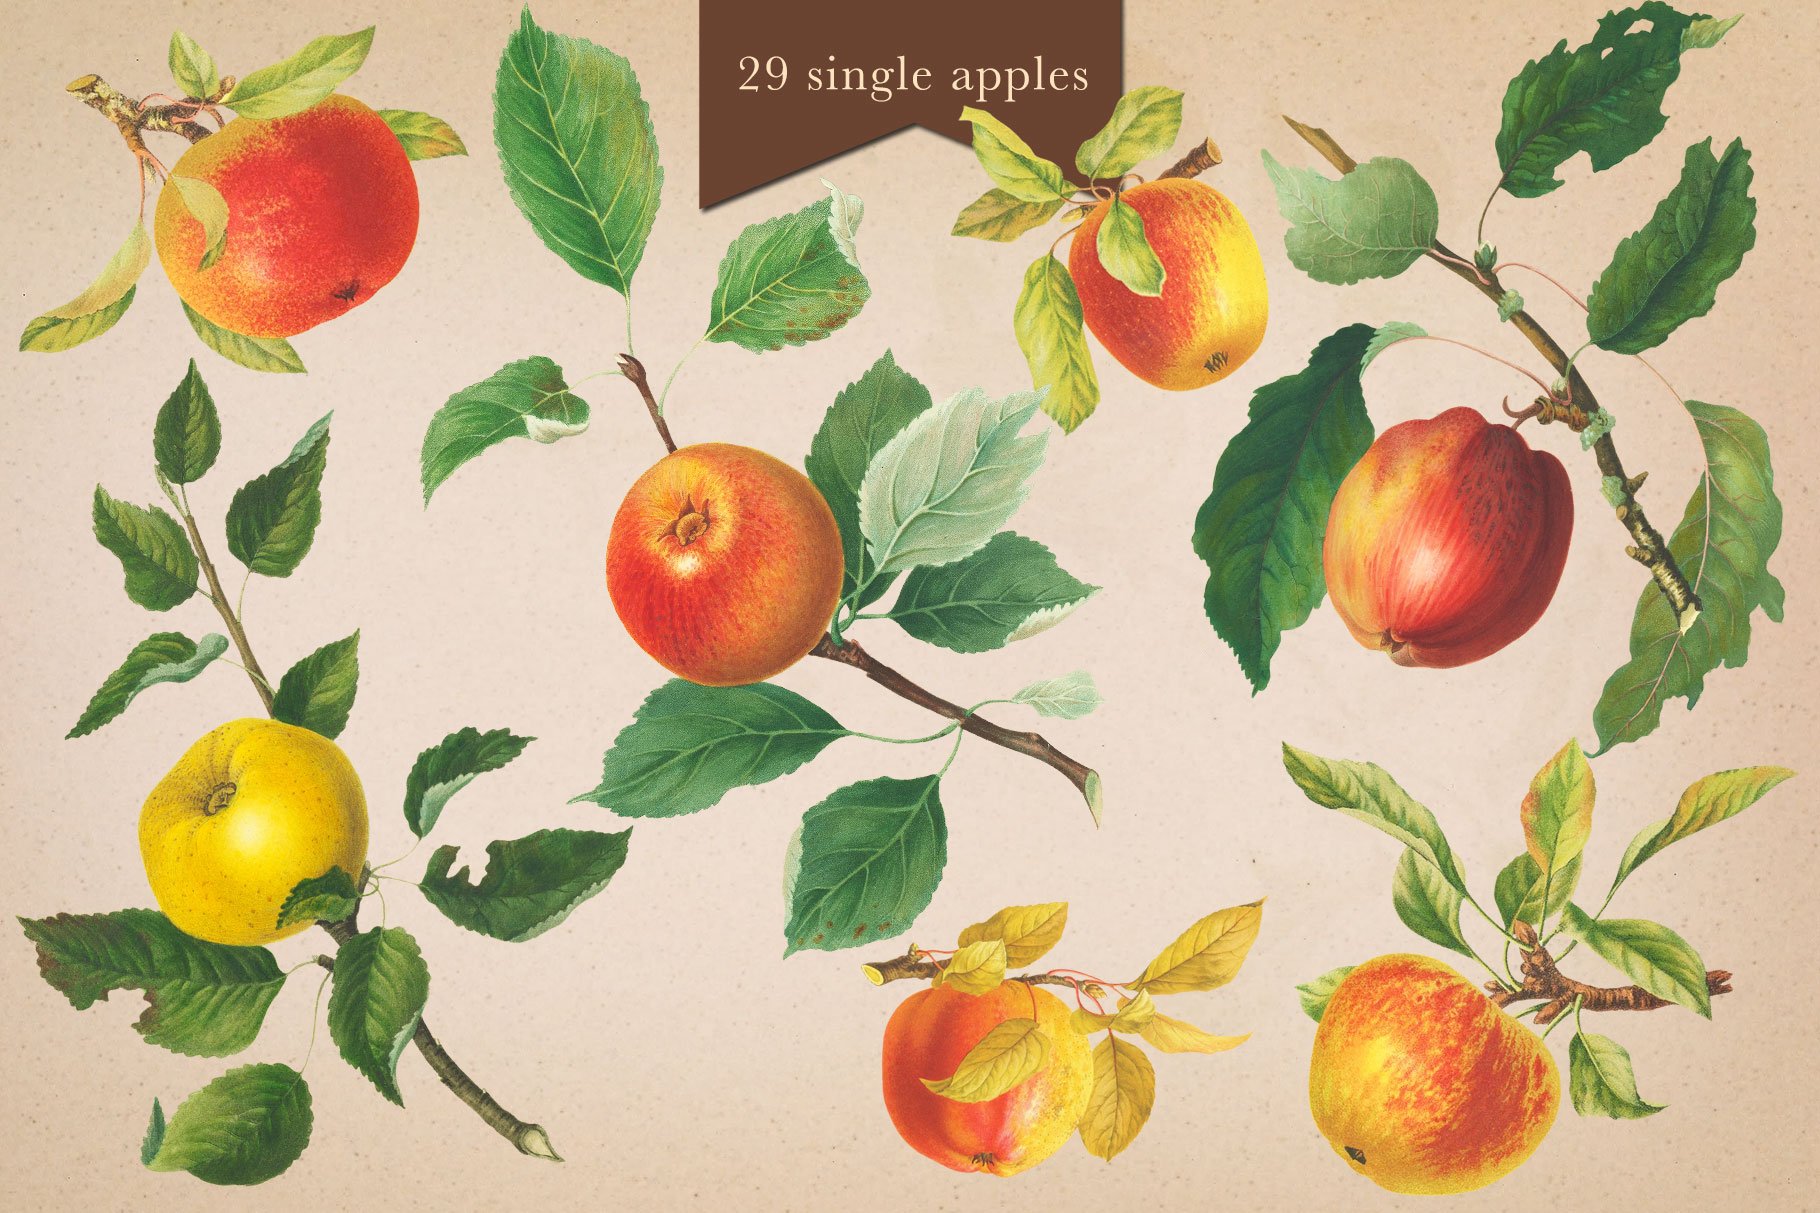 Cider House Apple & Pear Graphics